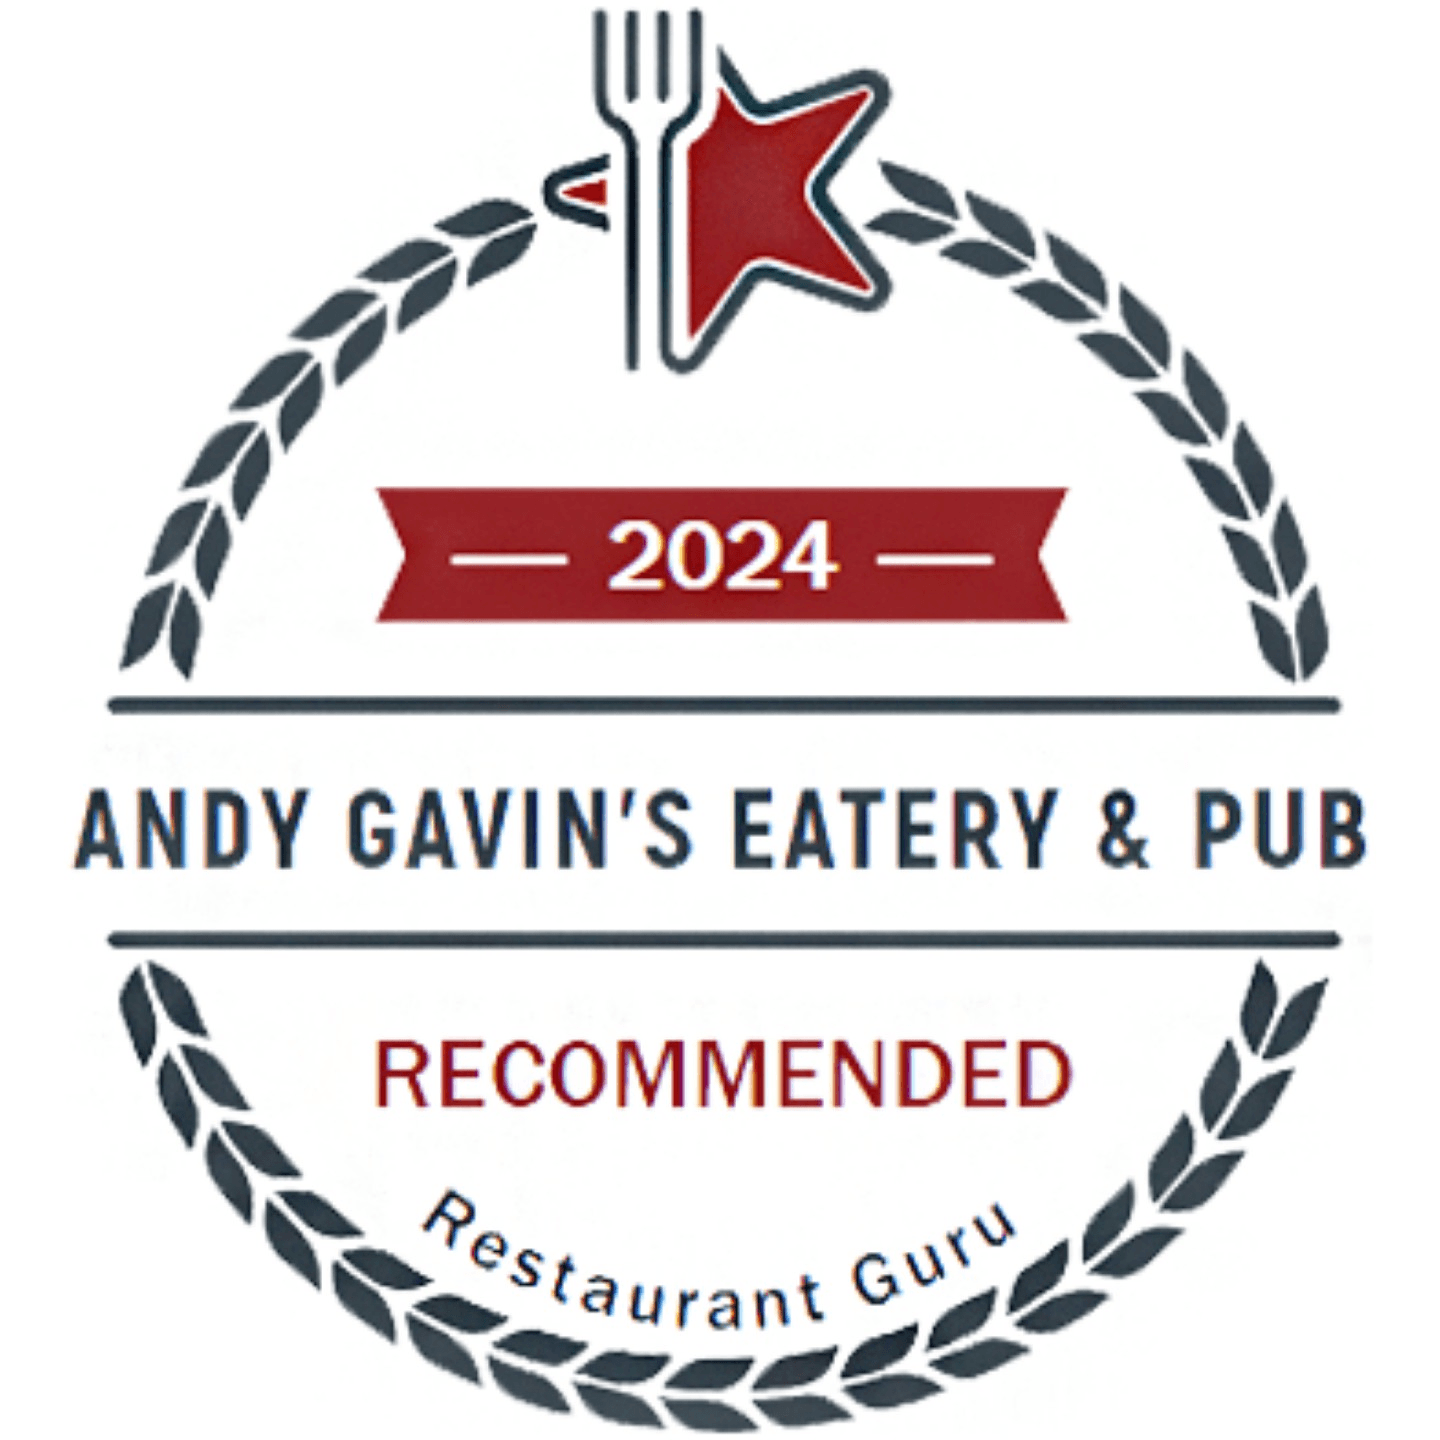 Recognized as Restaurant Guru's 2024 Recommended.